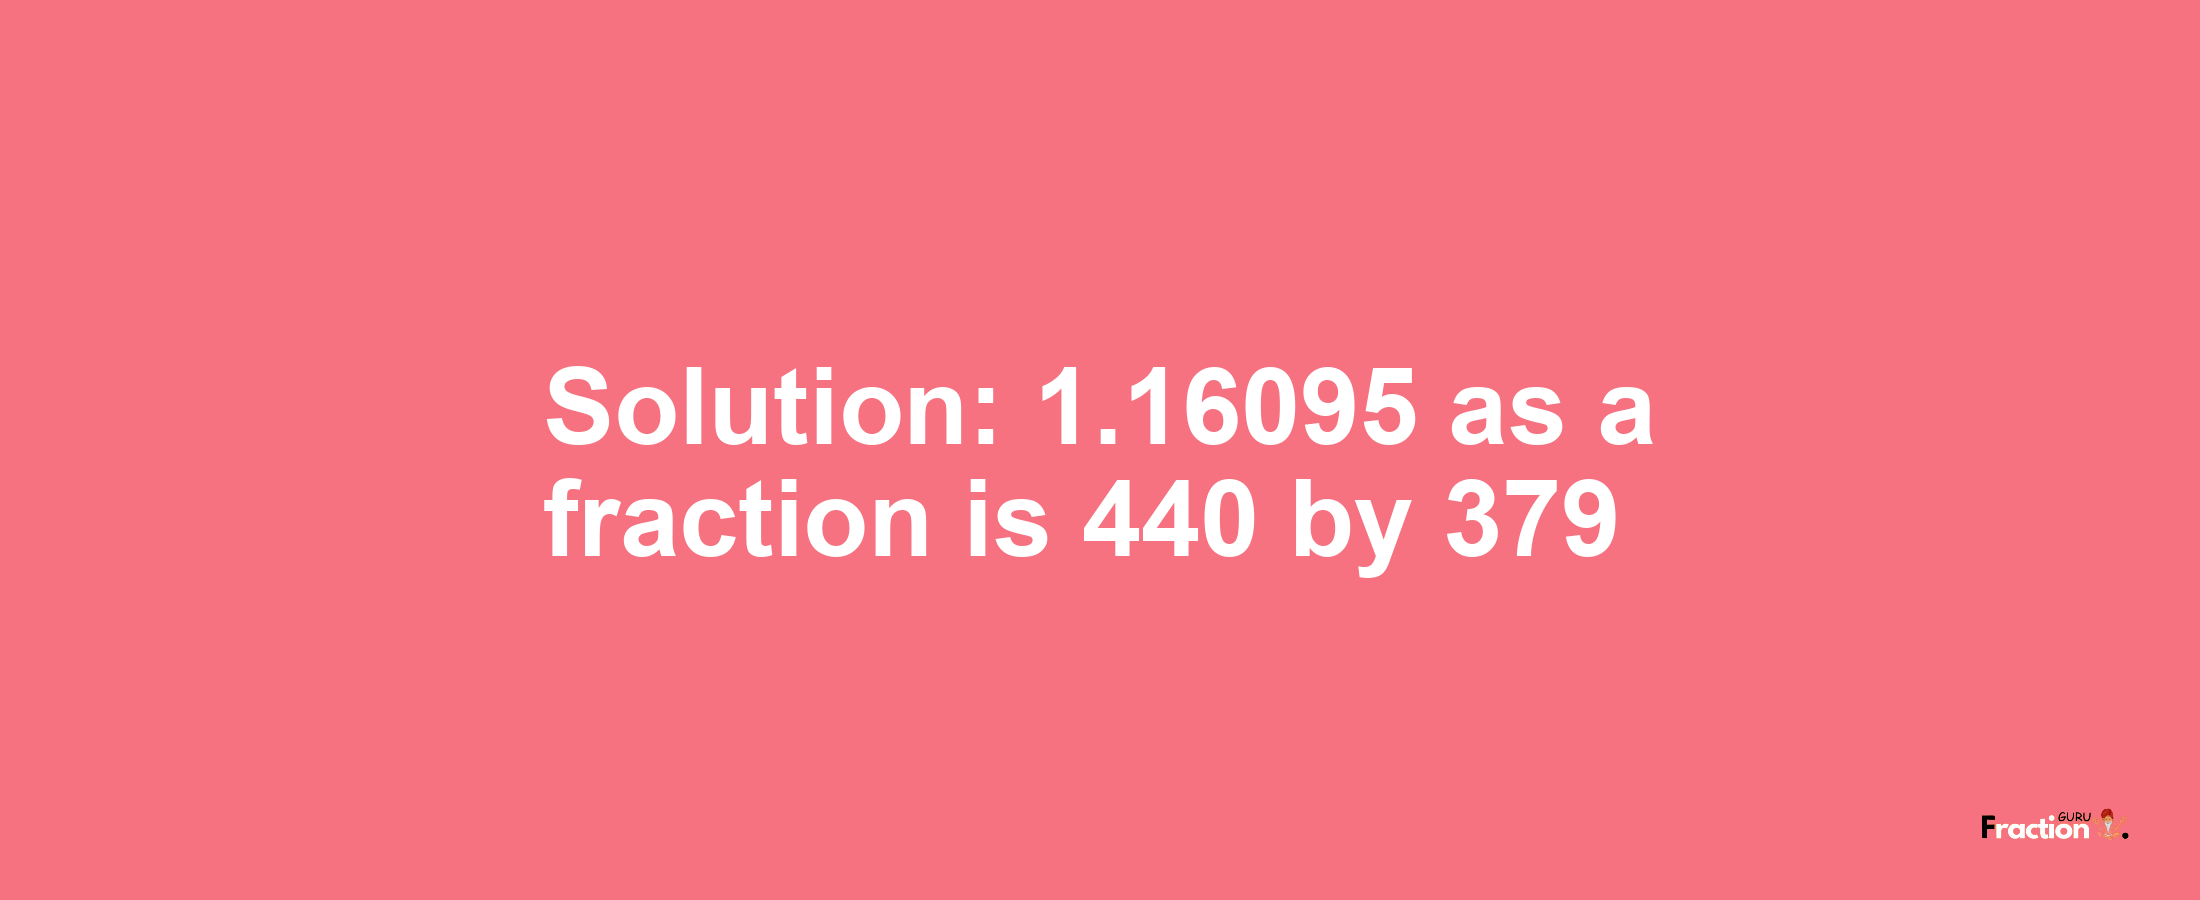 Solution:1.16095 as a fraction is 440/379